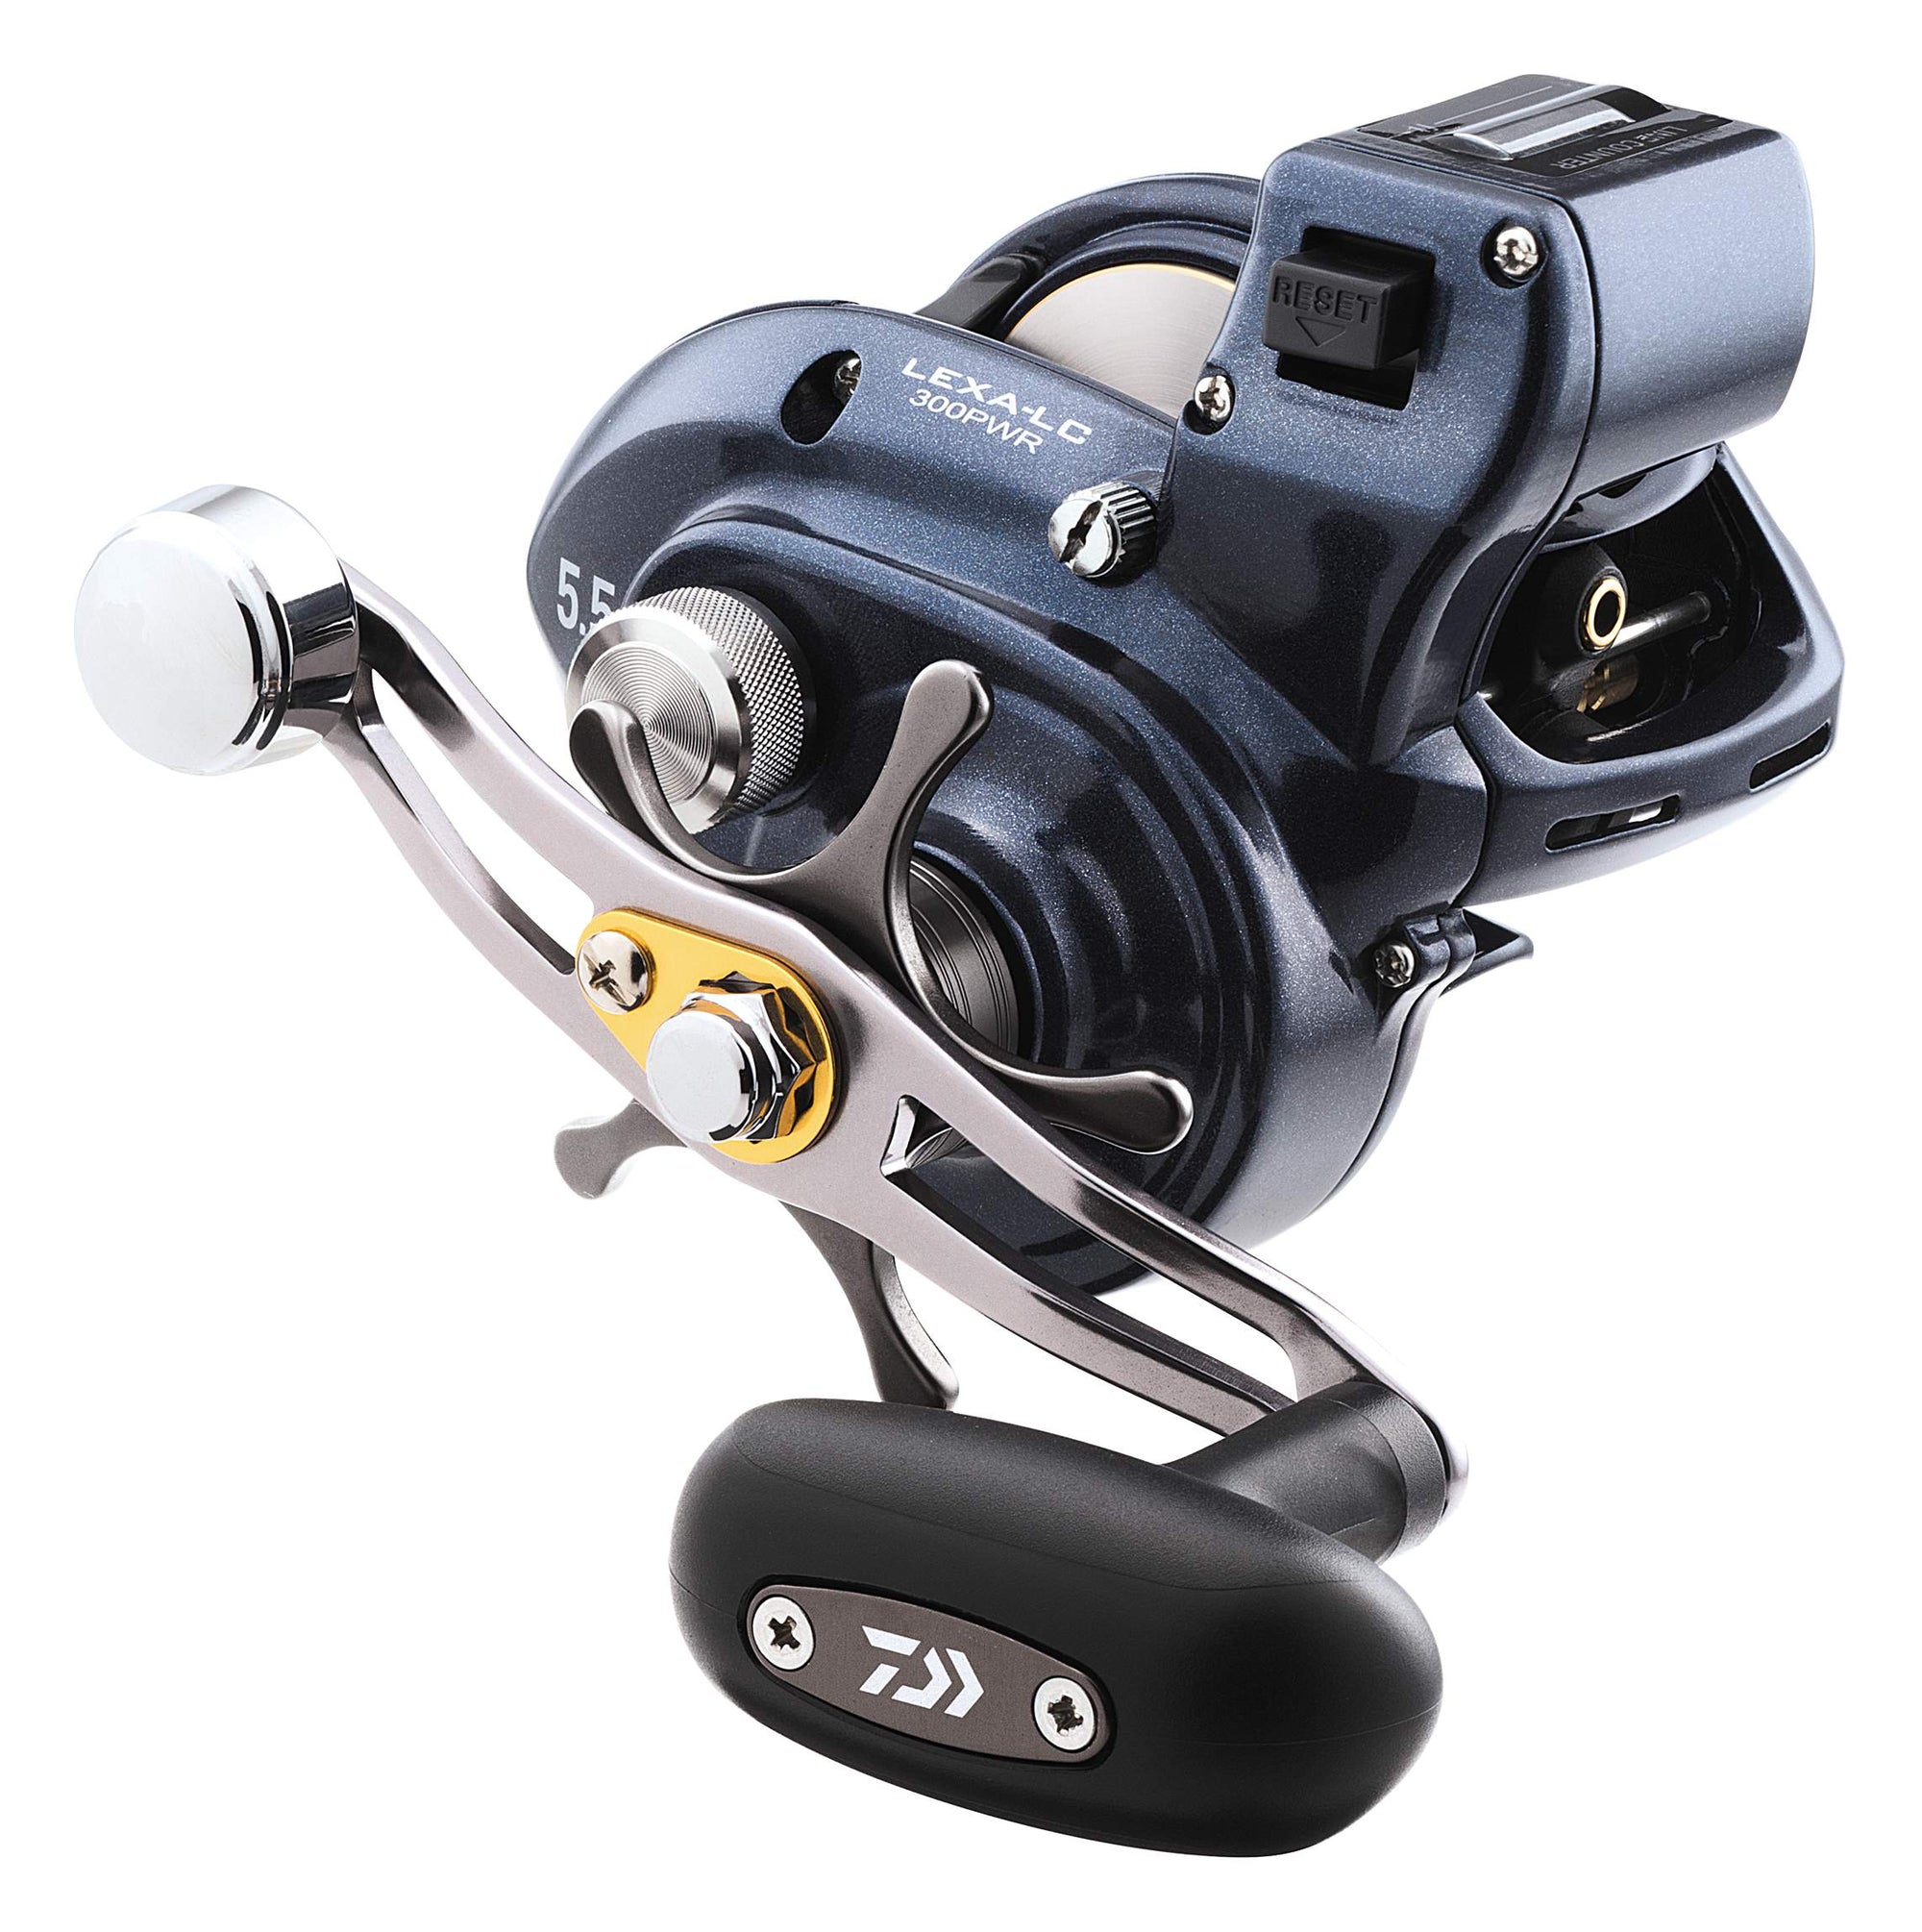 Dial In the Strike Zone With Daiwa - Fishing Tackle Retailer - The